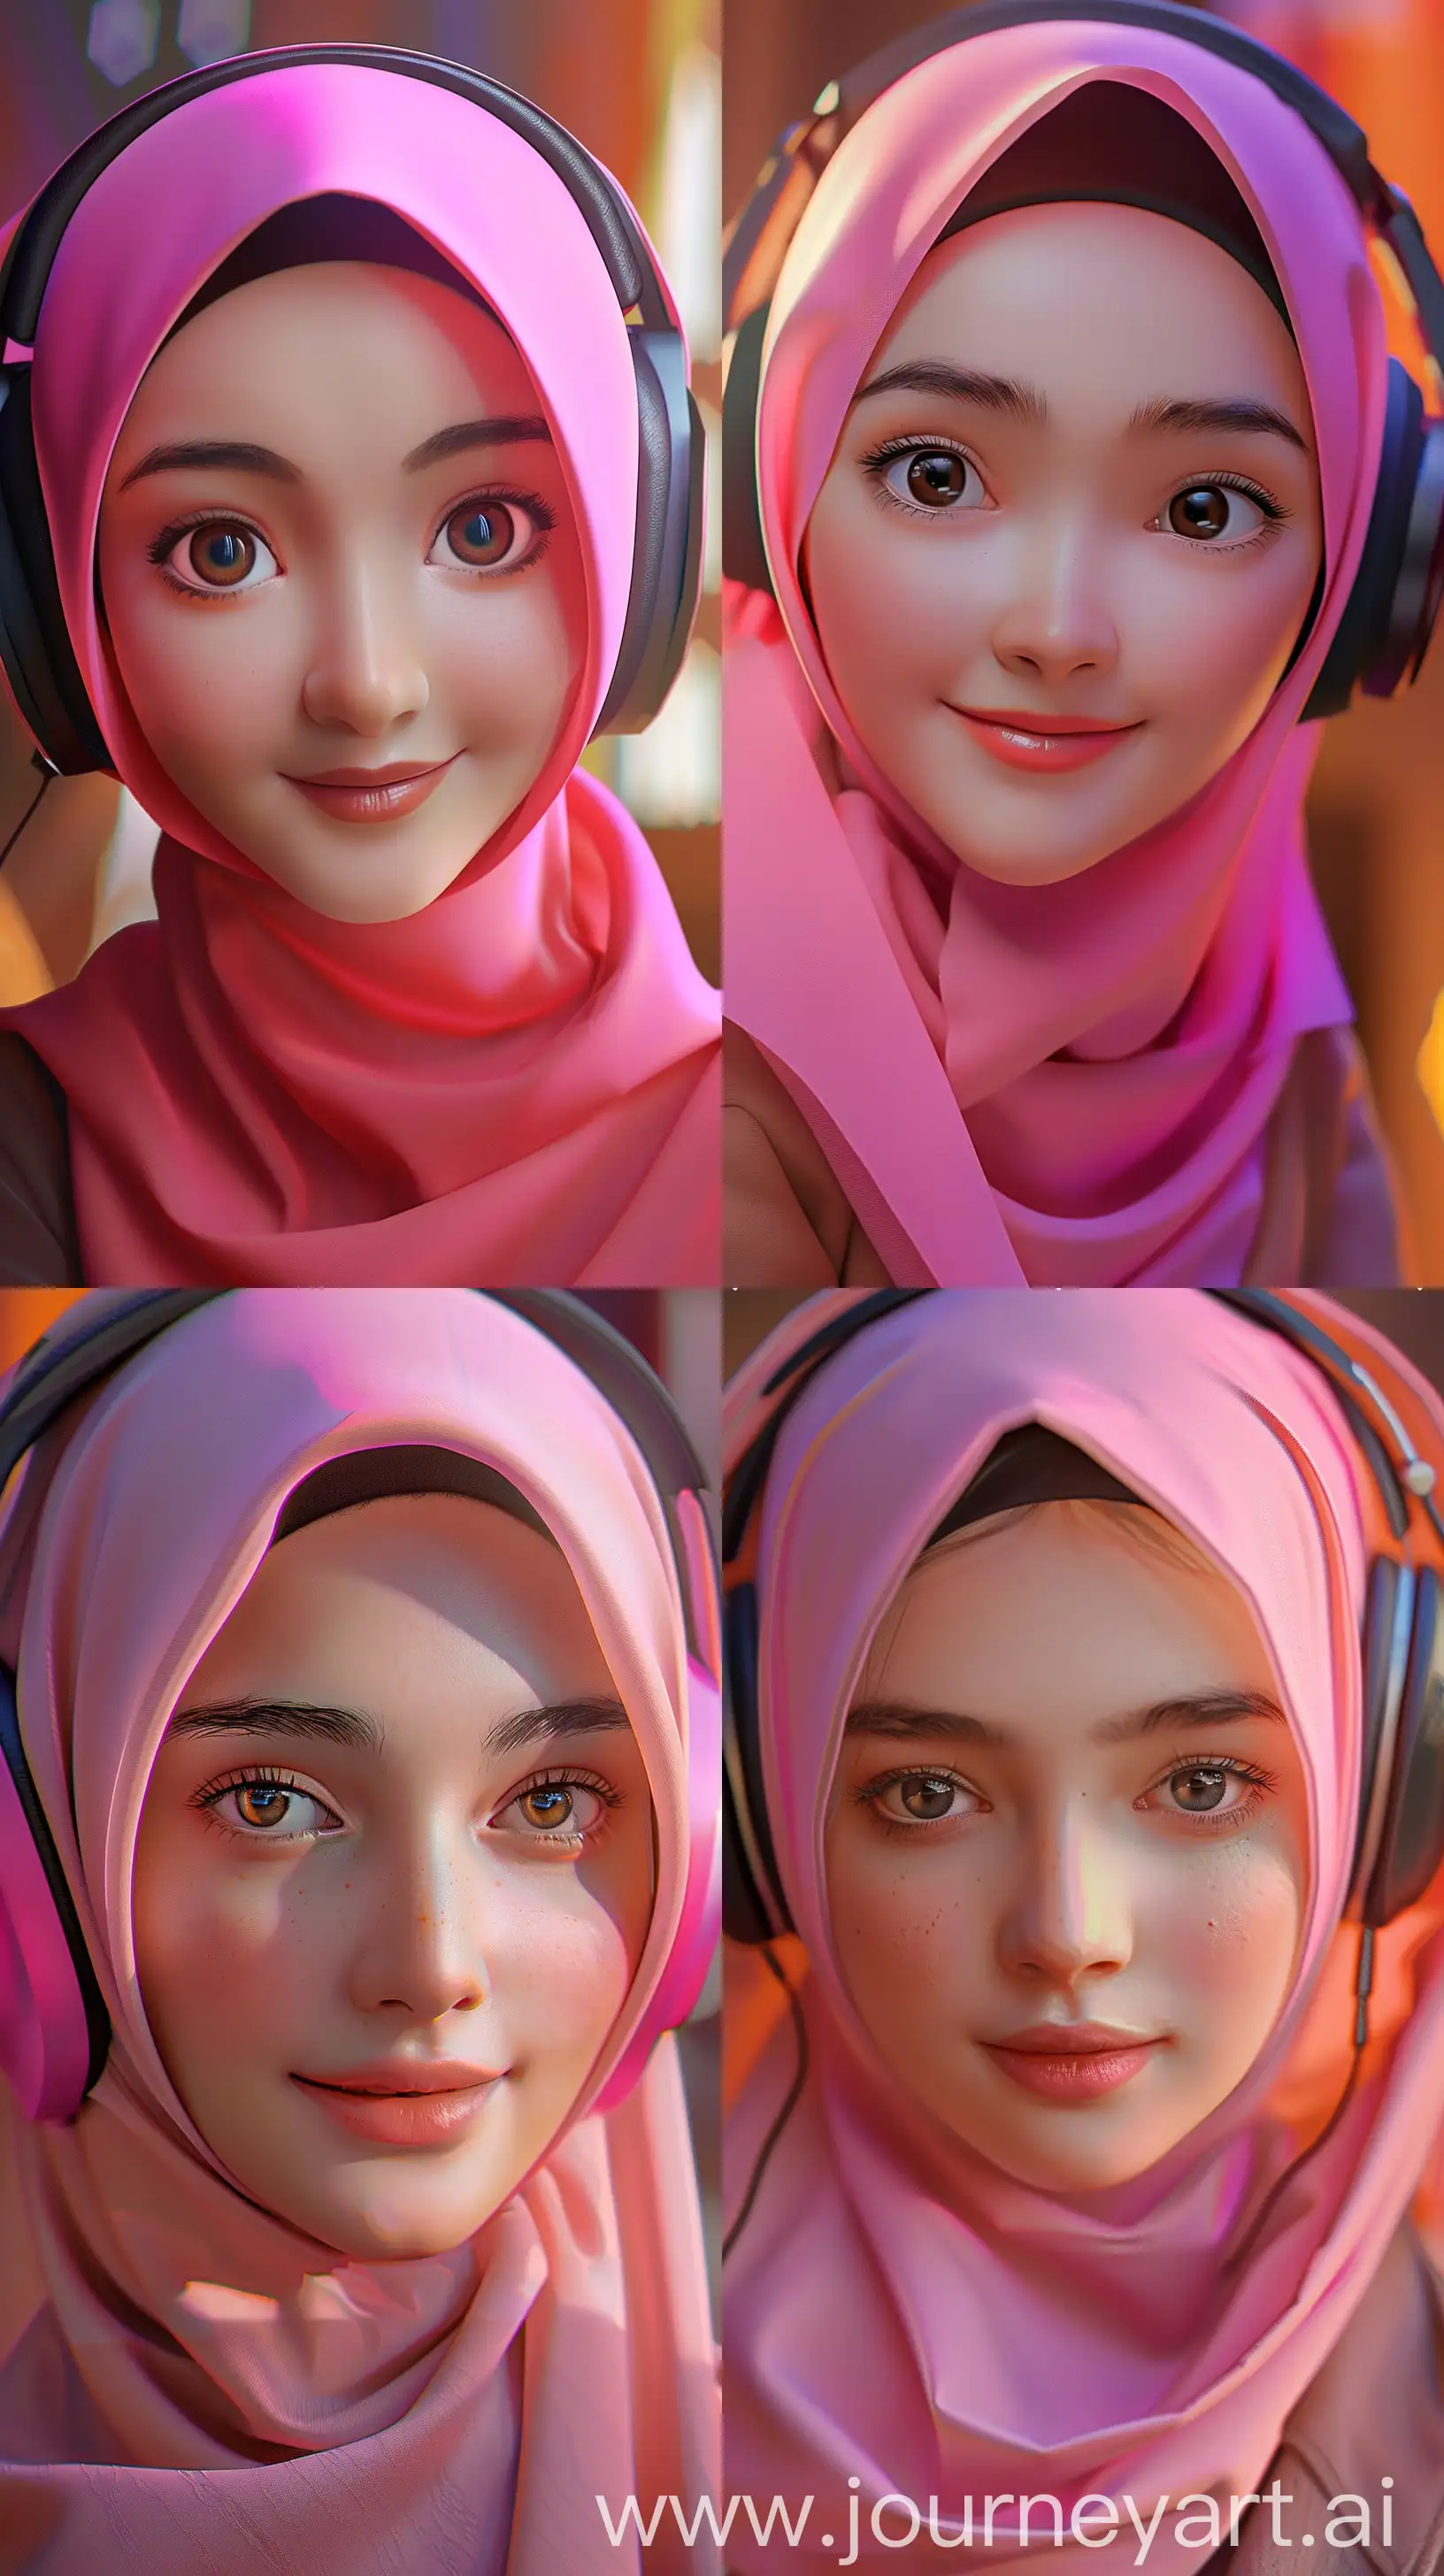 [ https://i.imgur.com/zQOP5IQ.jpeg ] Make an image that is exactly the same as this example. Please render in typical Disney pixar style, wear pink hijab, smiling into camera, sharp focus and detailed, 8k, hyper realistic, natural lighting, minimalist background. --ar 9:16